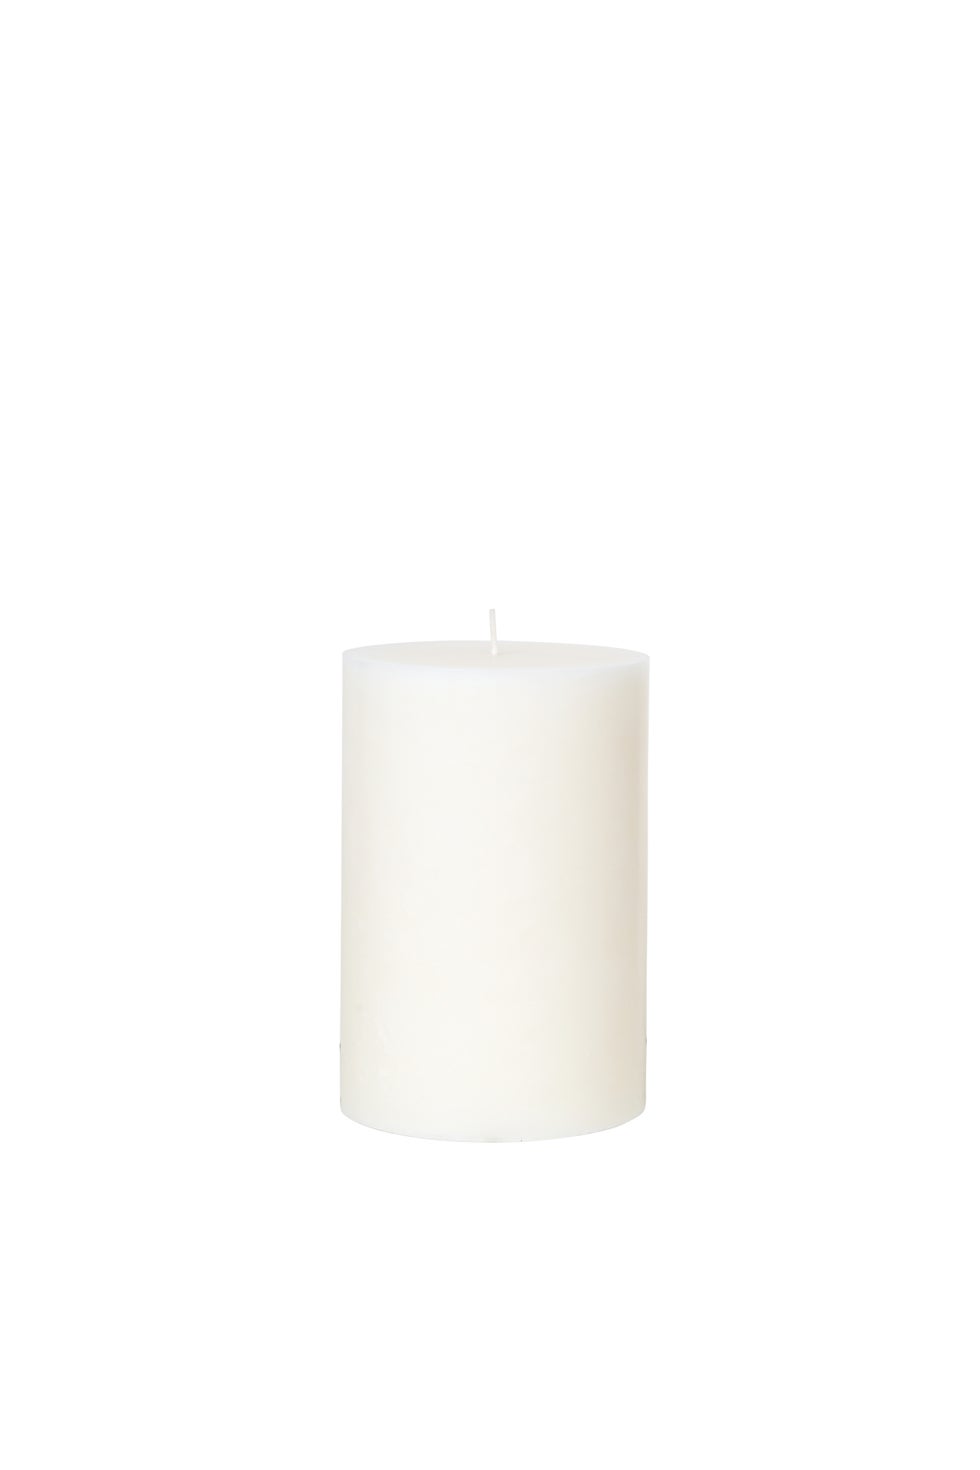 BROSTE Candle Stearin Pure White 10 x 15cm